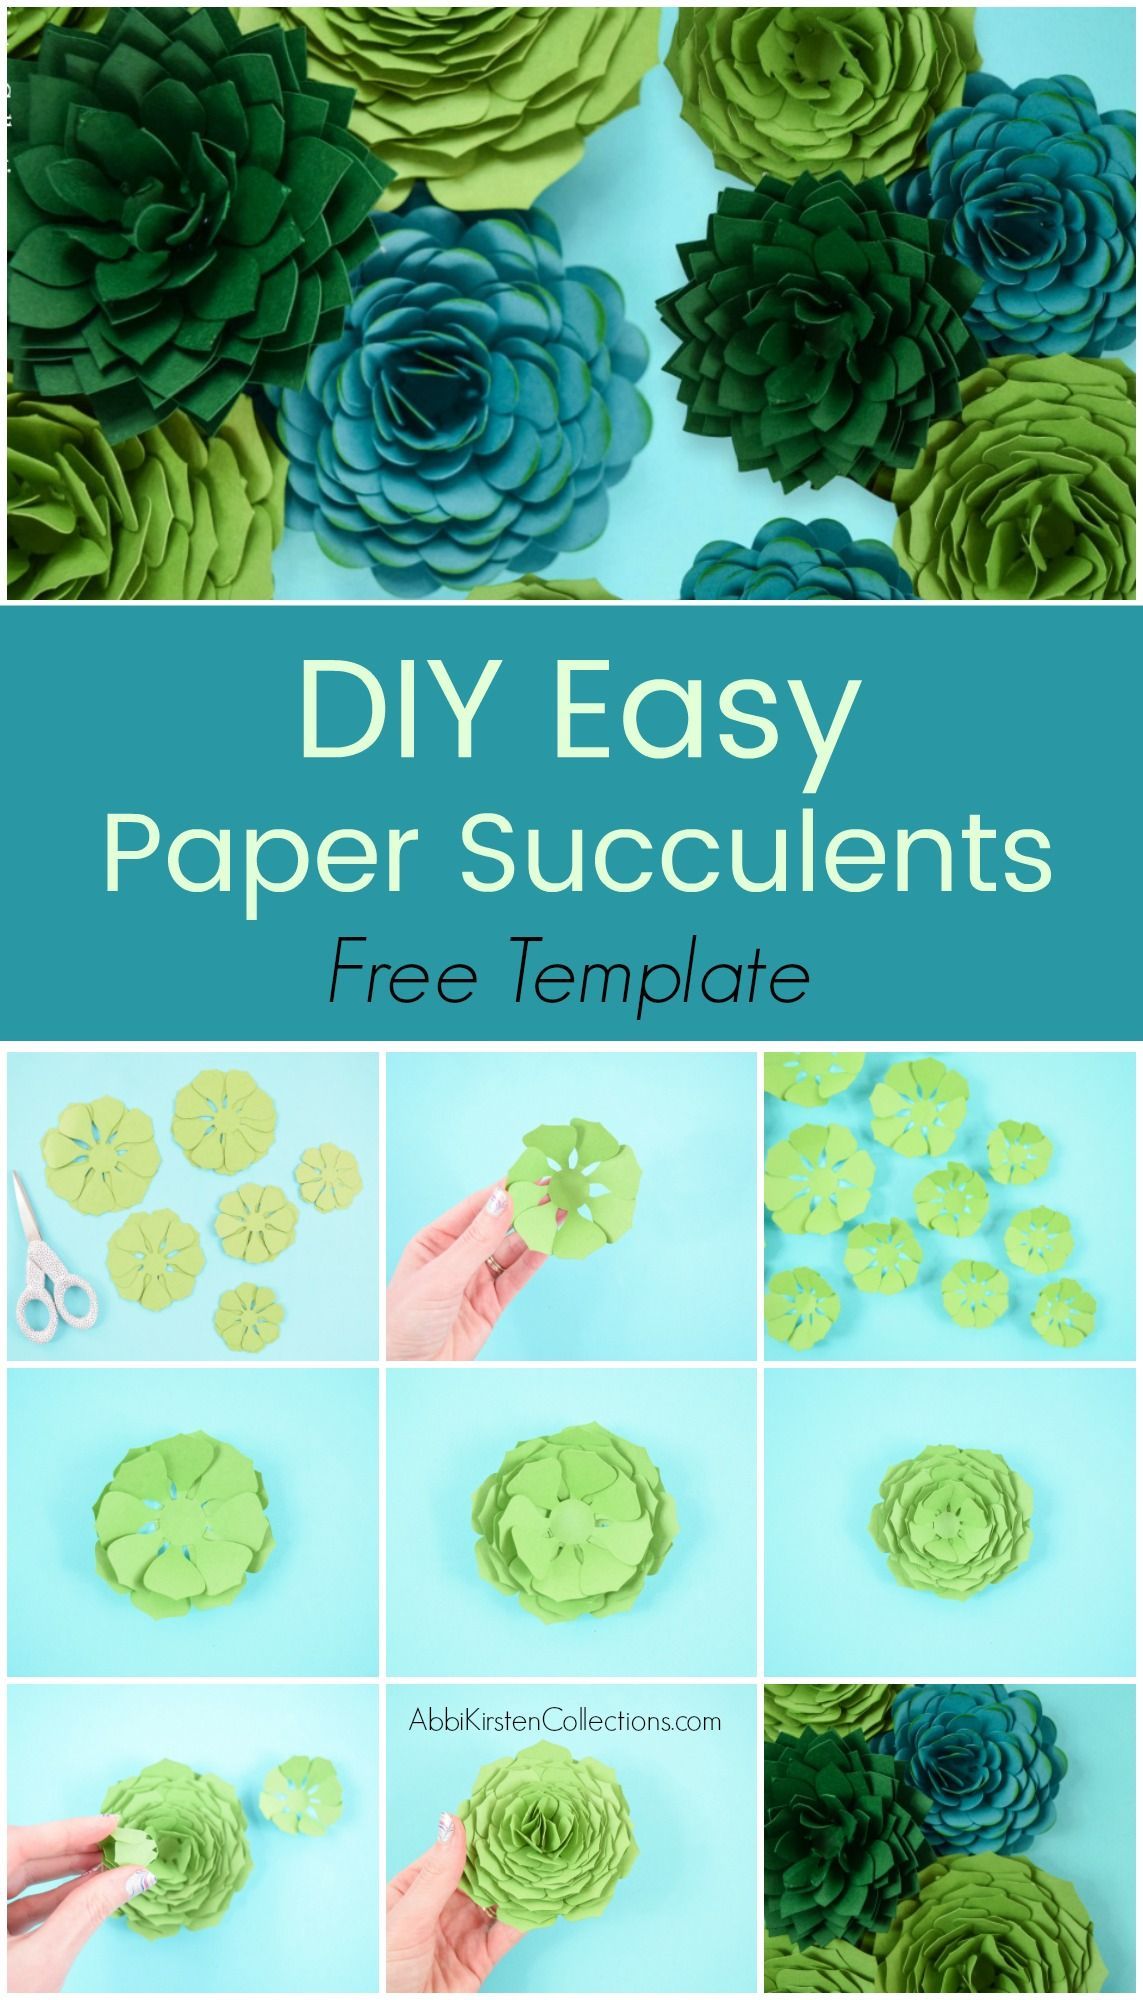 DIY Paper Succulent Flower Templates and Tutorial - DIY Paper Succulent Flower Templates and Tutorial -   19 diy Paper succulents ideas